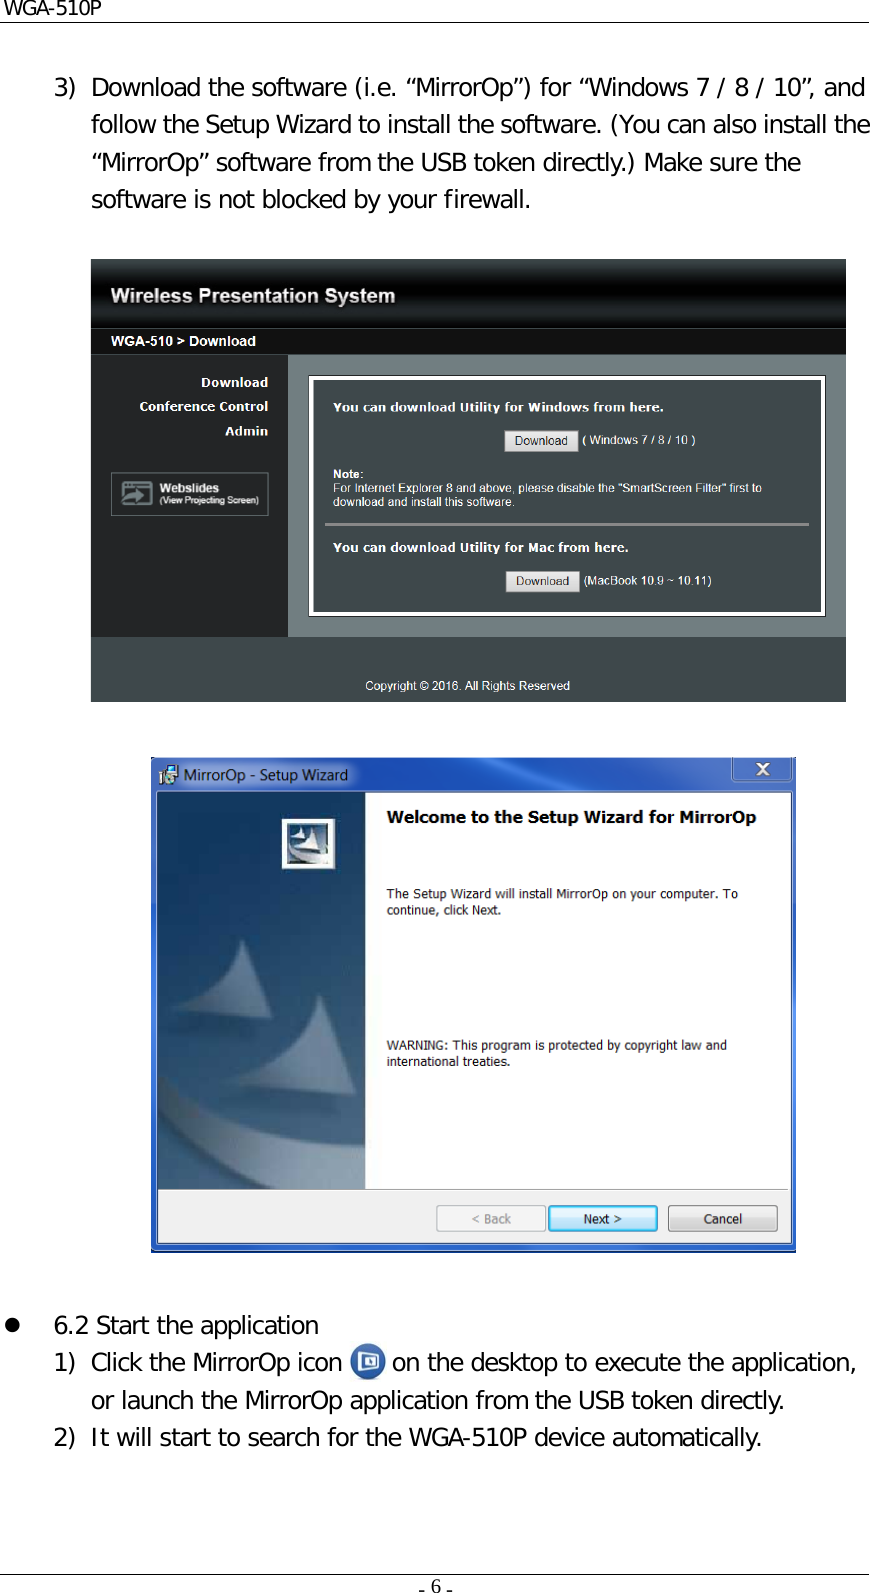 WGA-510P     -    -  6   3) Download the software (i.e. “MirrorOp”) for “Windows 7 / 8 / 10”, and follow the Setup Wizard to install the software. (You can also install the “MirrorOp” software from the USB token directly.) Make sure the software is not blocked by your firewall.                       6.2 Start the application 1) Click the MirrorOp icon    on the desktop to execute the application, or launch the MirrorOp application from the USB token directly.  2) It will start to search for the WGA-510P device automatically. 